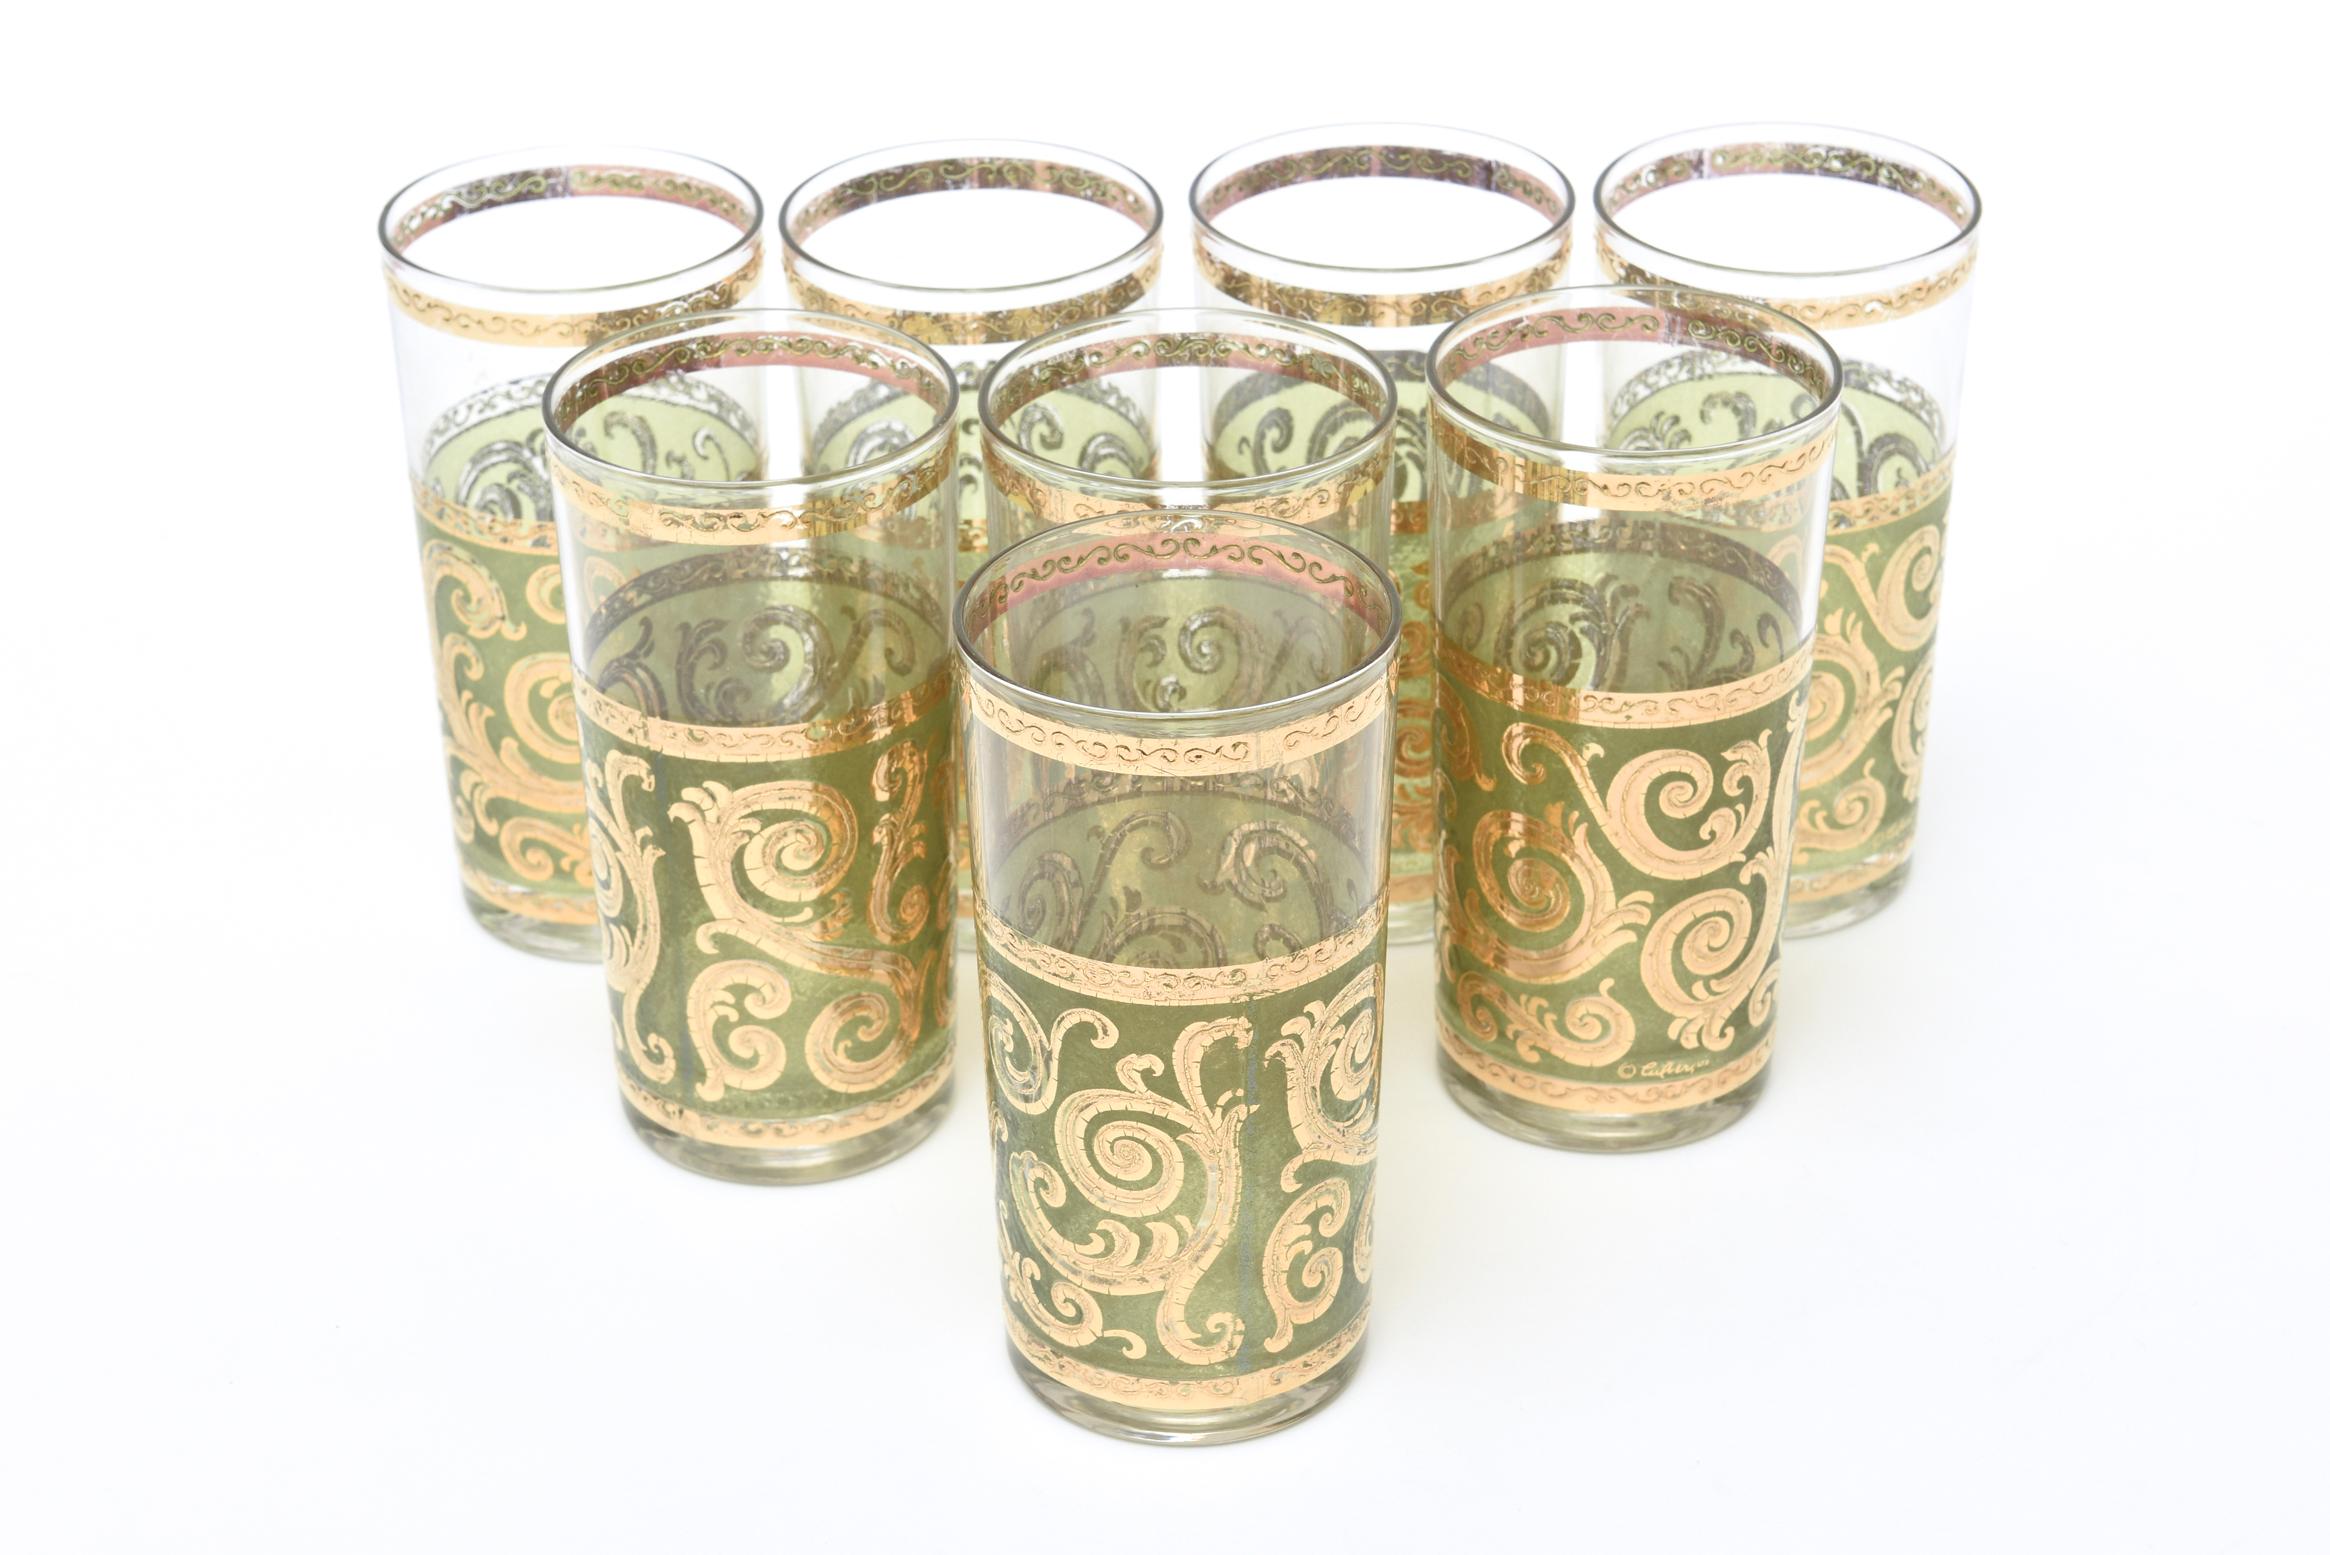 This set of 8 signed culver Mid-Century Modern glass barware are the highball glasses with a 22-carat gold painted overlap with scroll pattern against apple green or chartreuse glass. The rim of gold is also scroll work in gold. They are from the